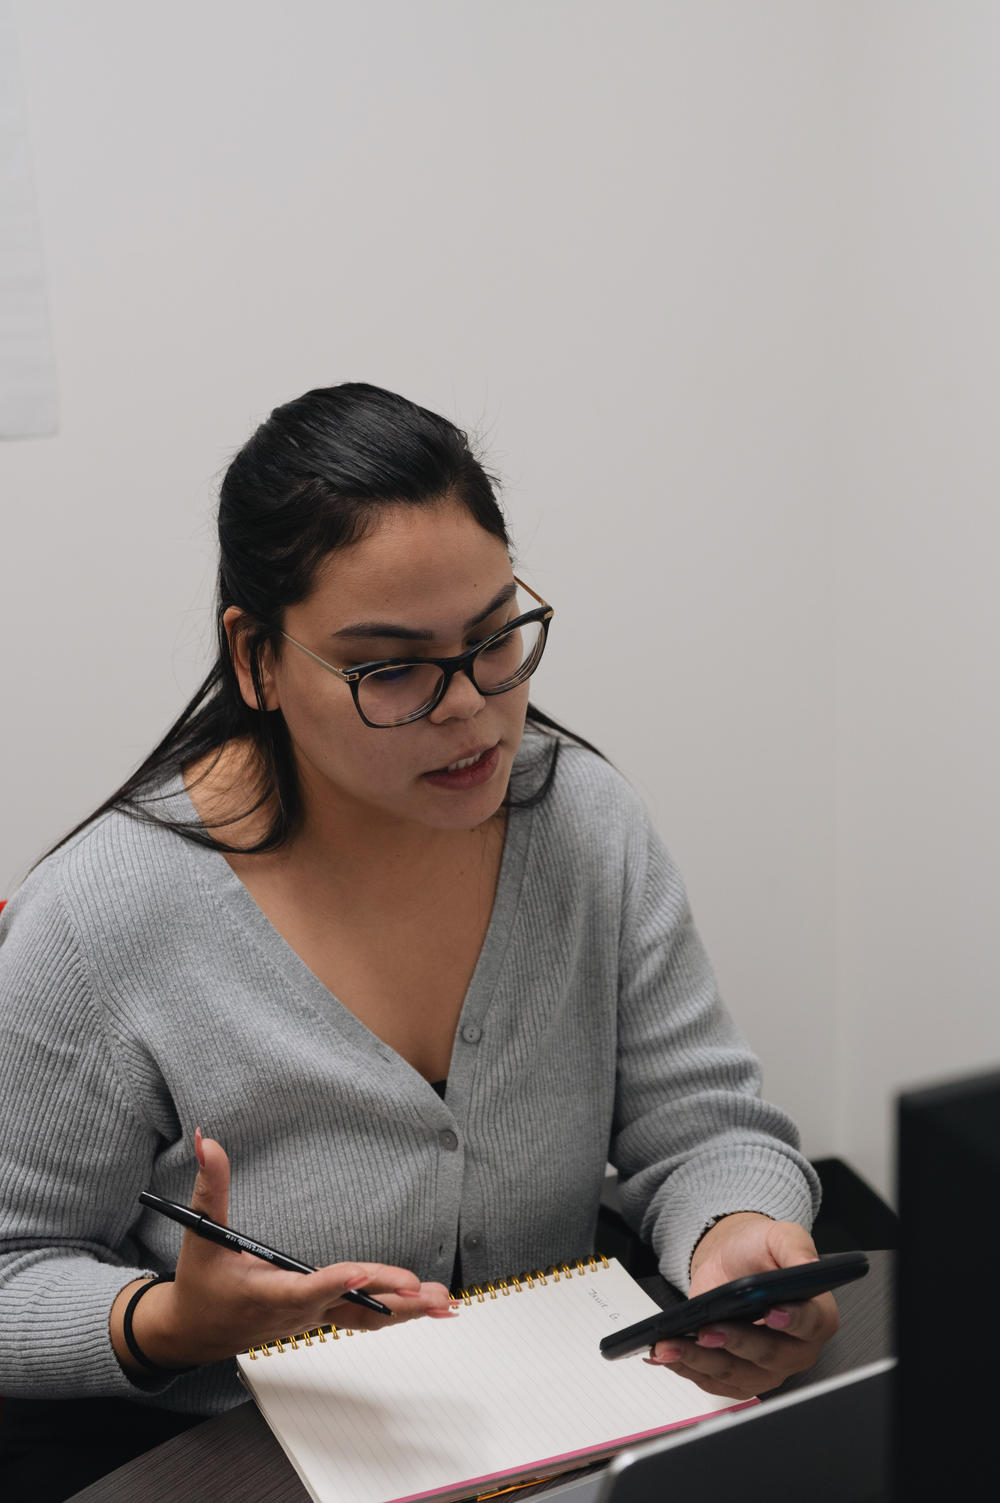 While most people need rent help, Juarez says that's not always the most urgent problem. She's used the allocated money for payday loan debt, appliances, laptops and, recently, an e-bike for someone whose mental illness made it difficult to take public transportation.